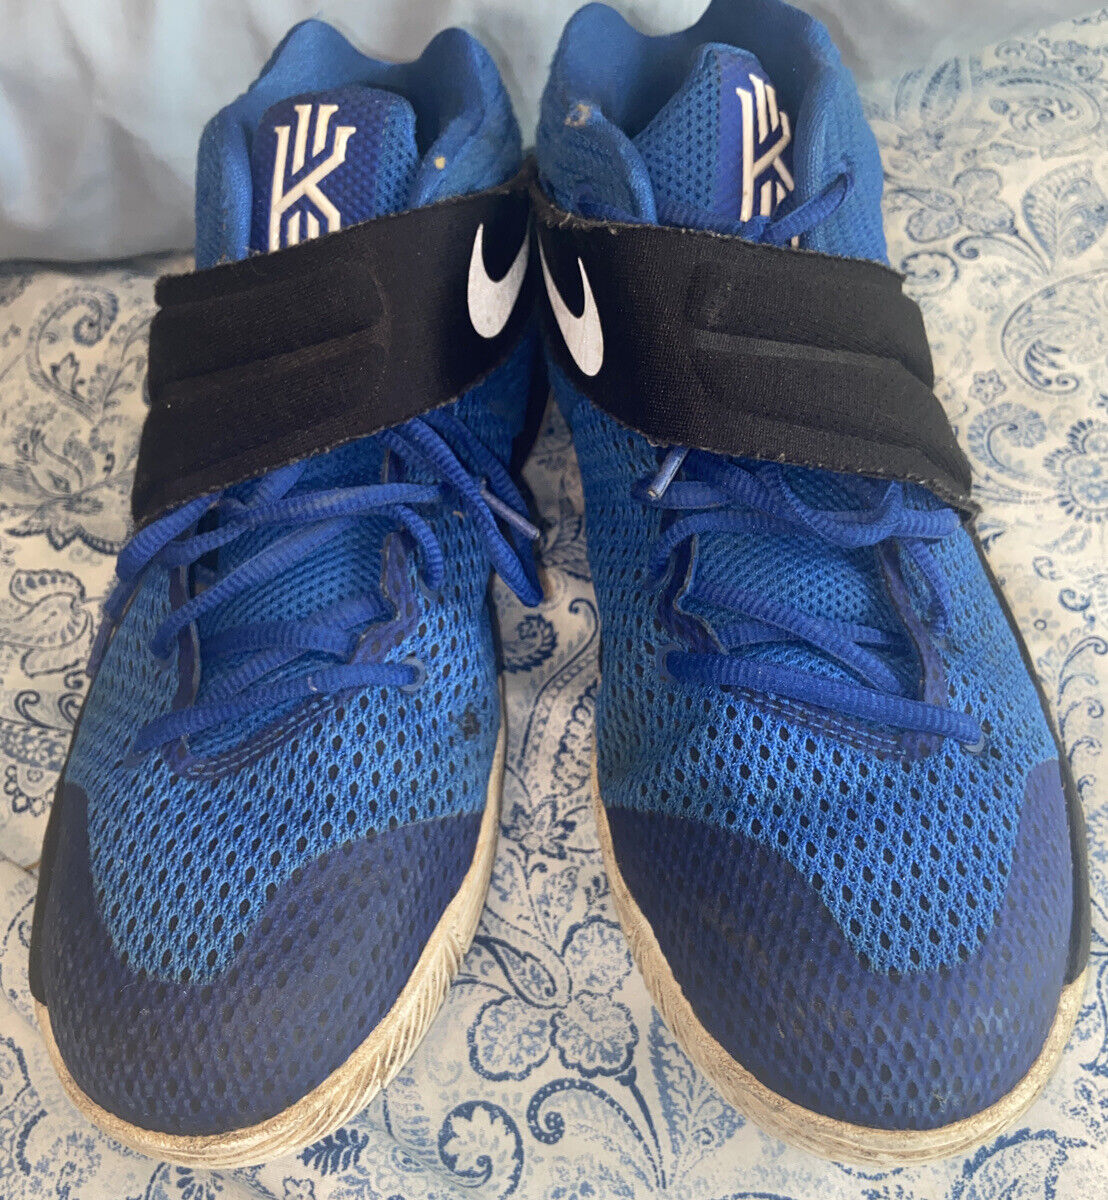 Nike Kyrie Irving 2 Royal Blue Youth Basketball Shoes Size 7Y | eBay